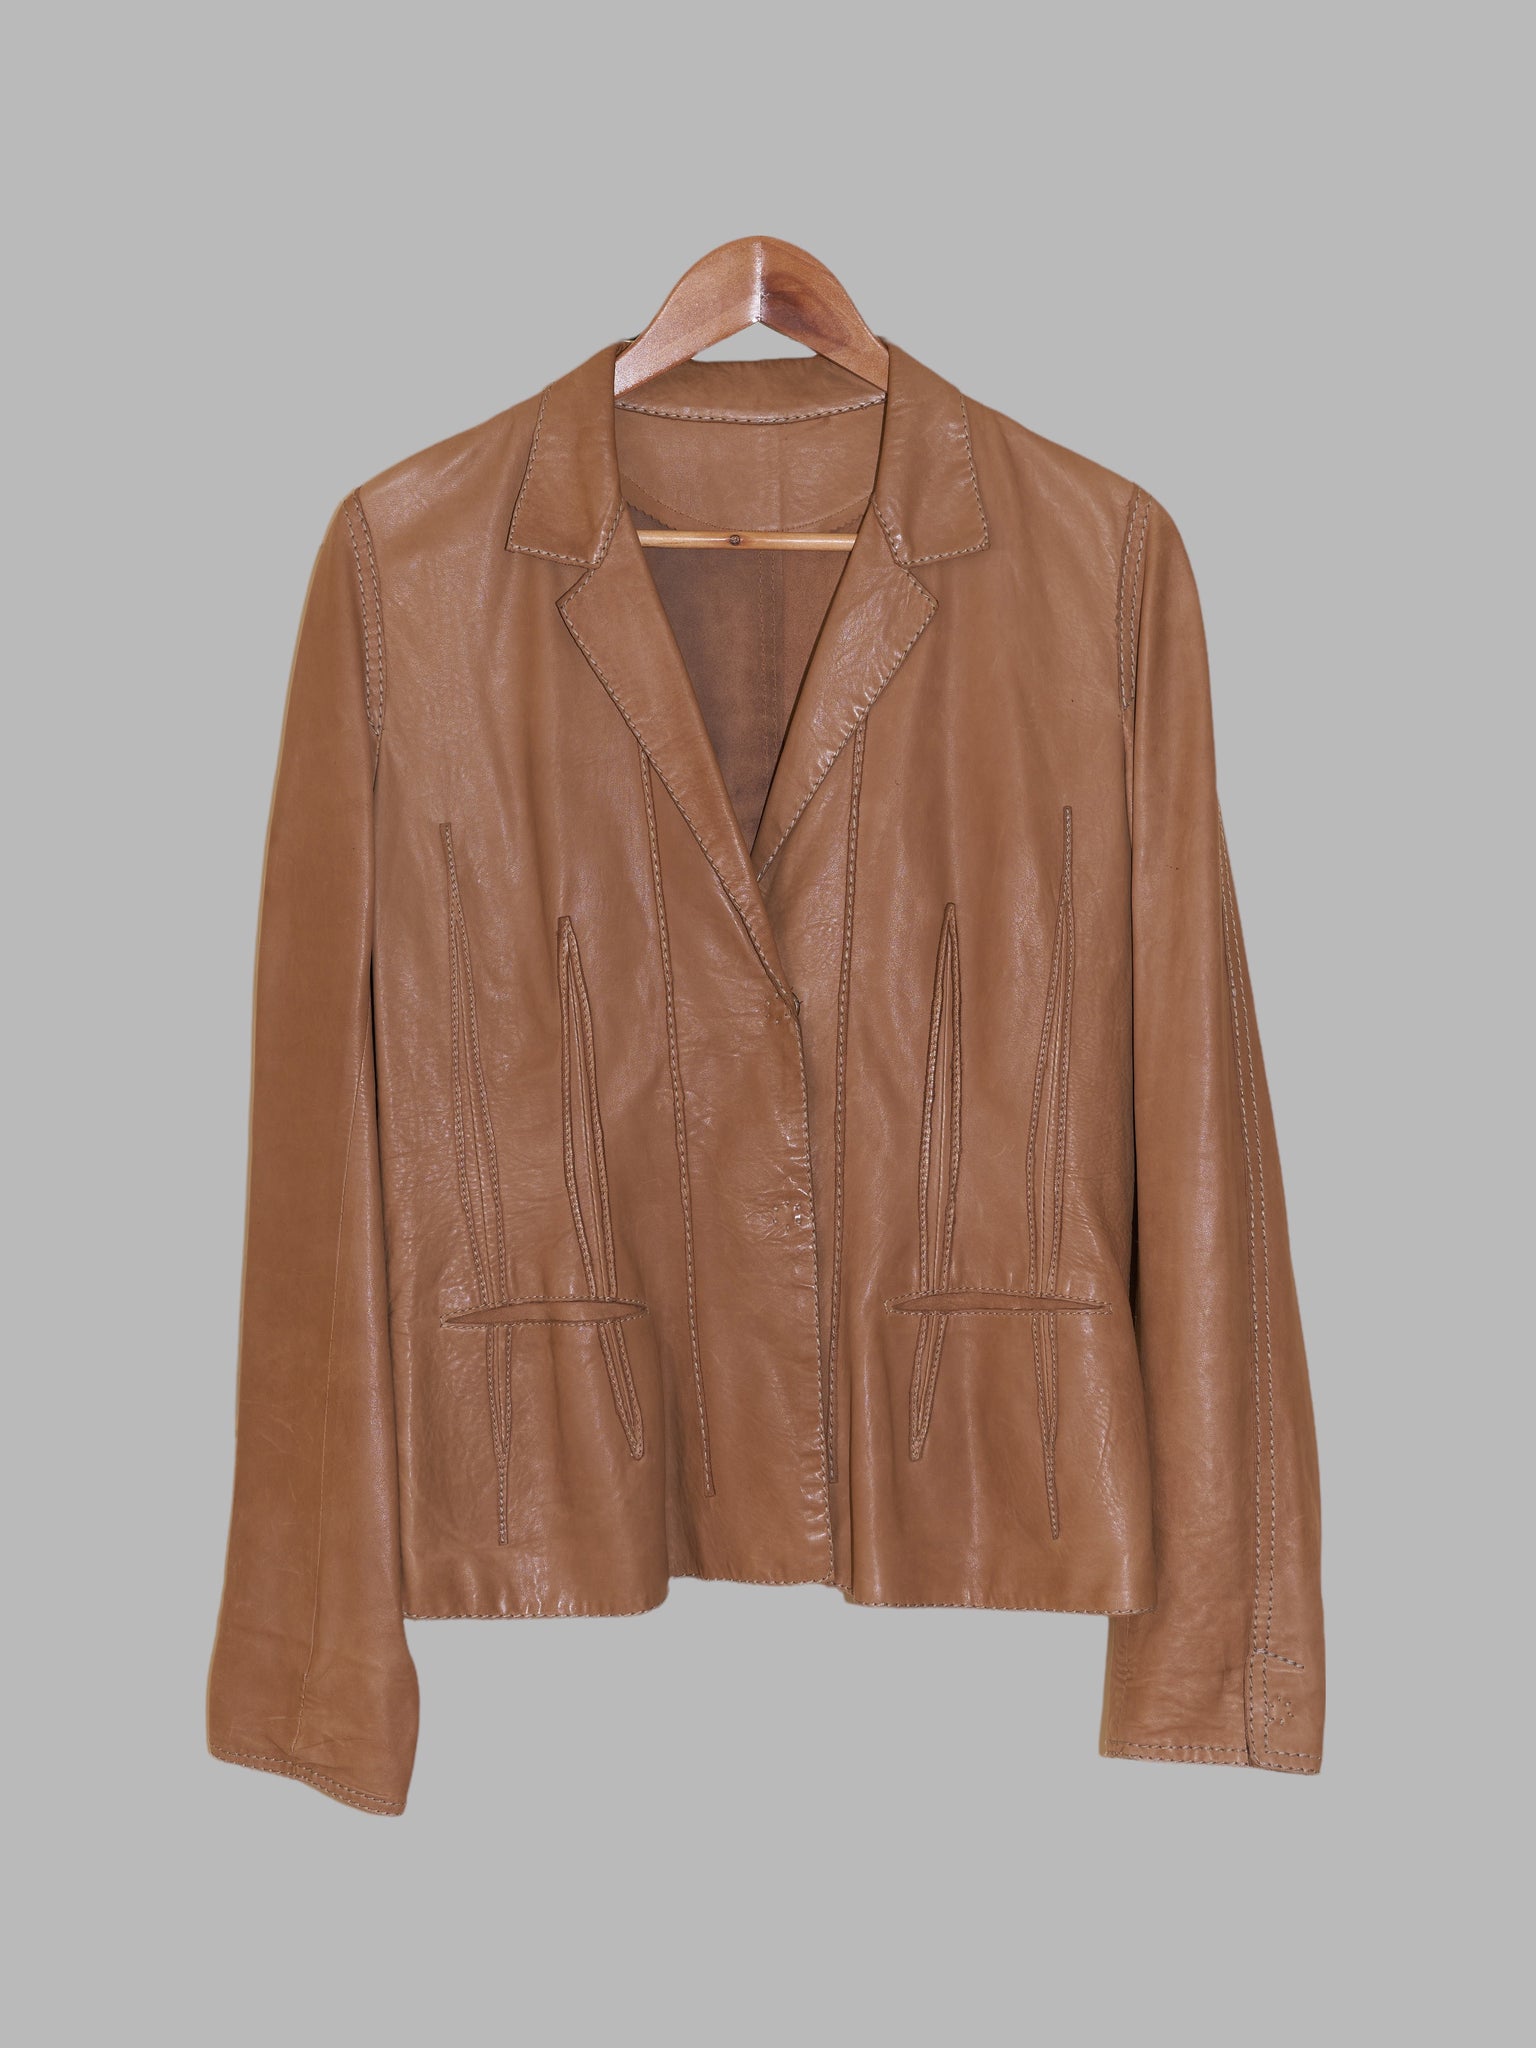 Sylvie Schimmel brown covered placket leather blazer with visible darts - size 42